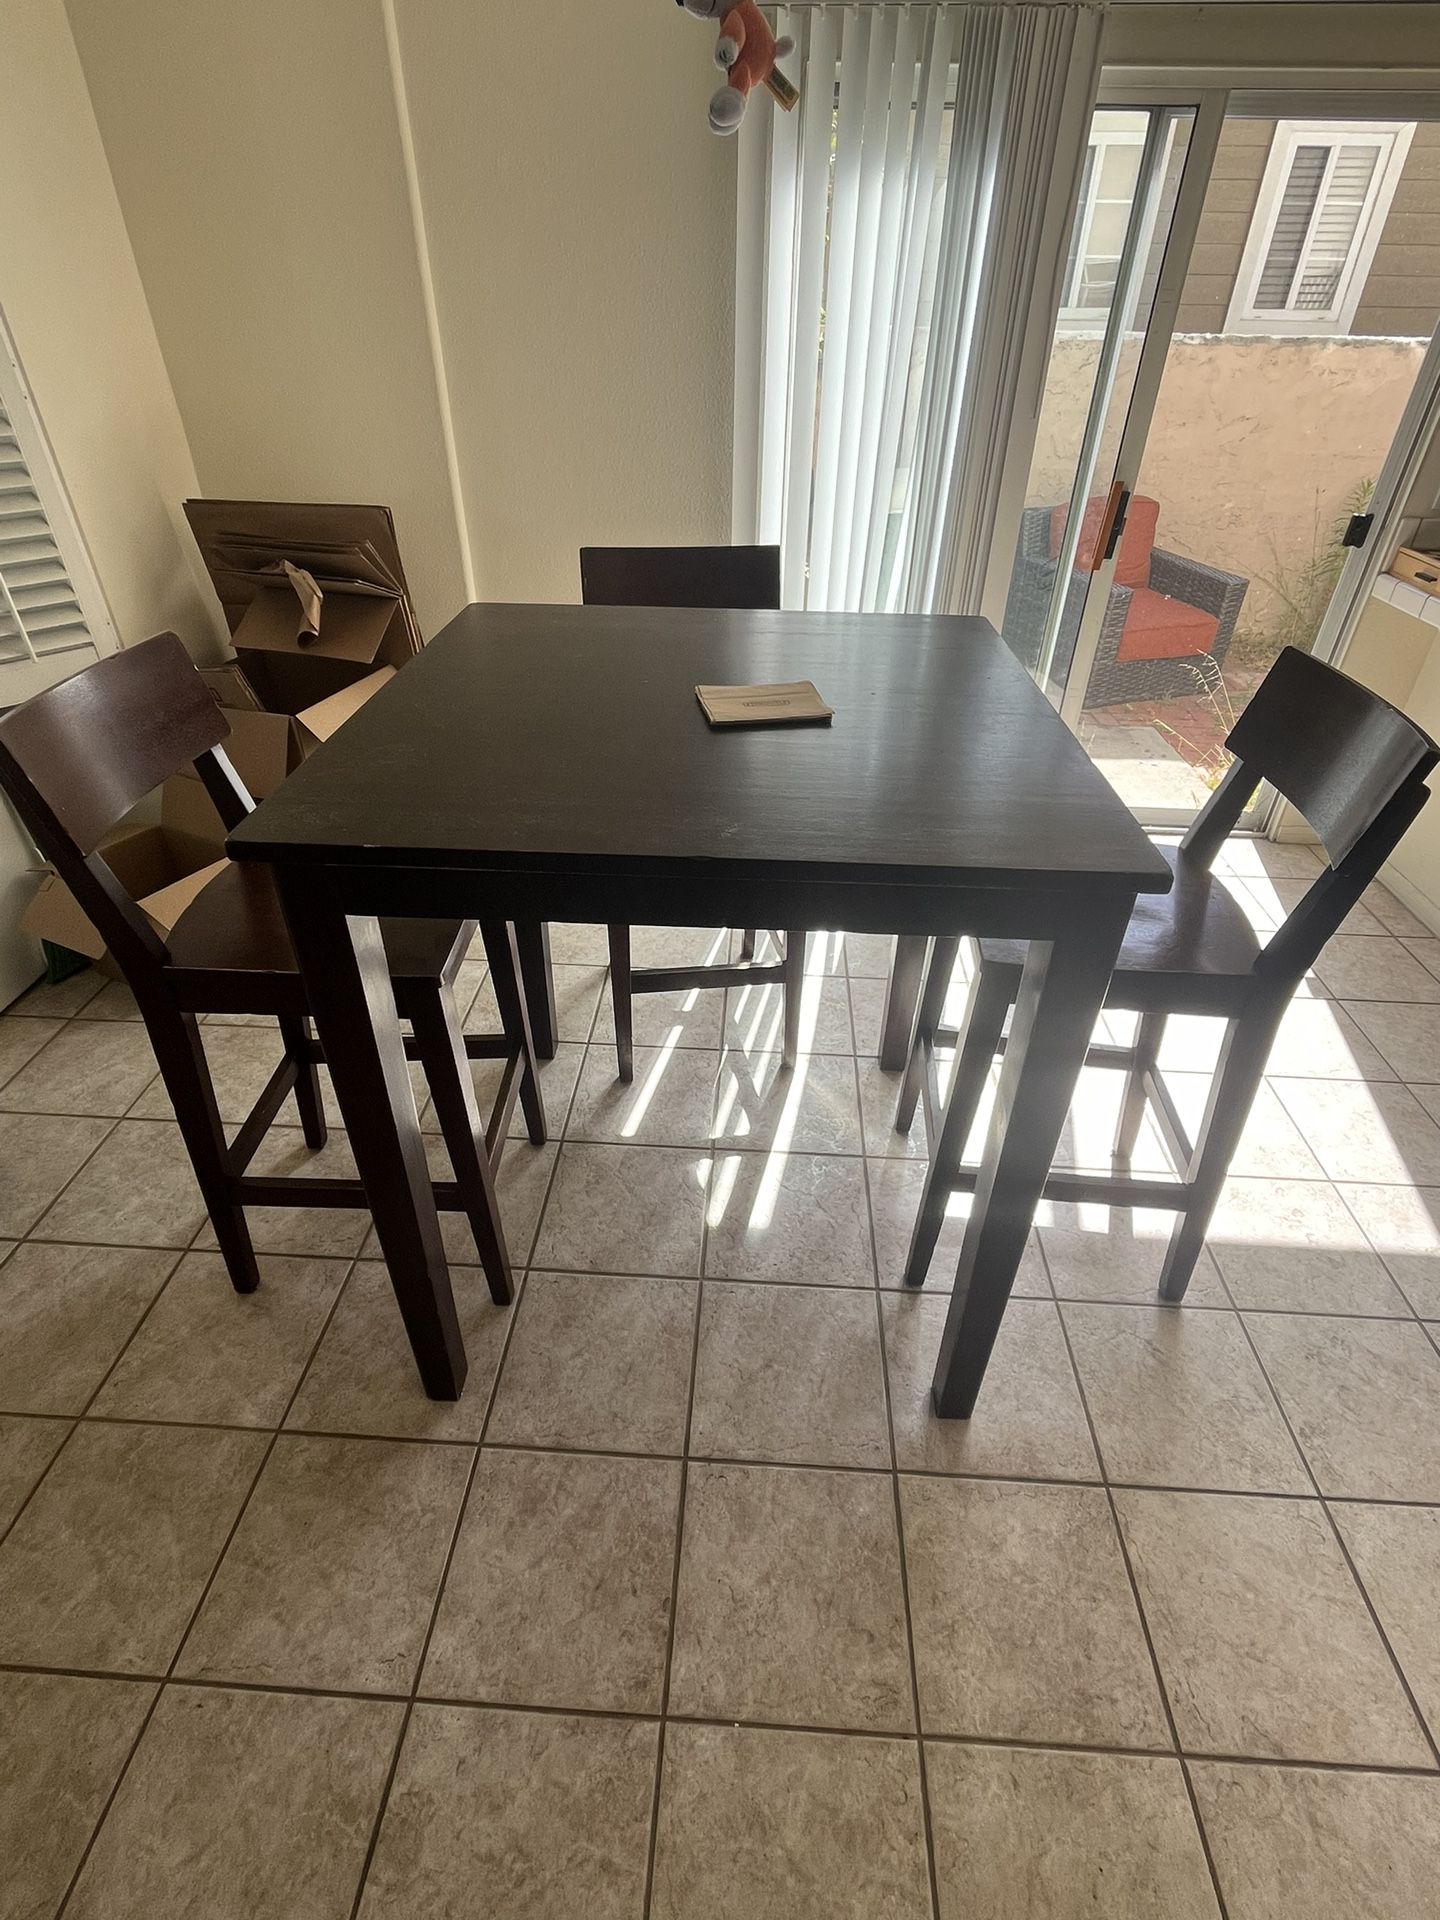 Kitchen Table With 3 Chairs/ Stools